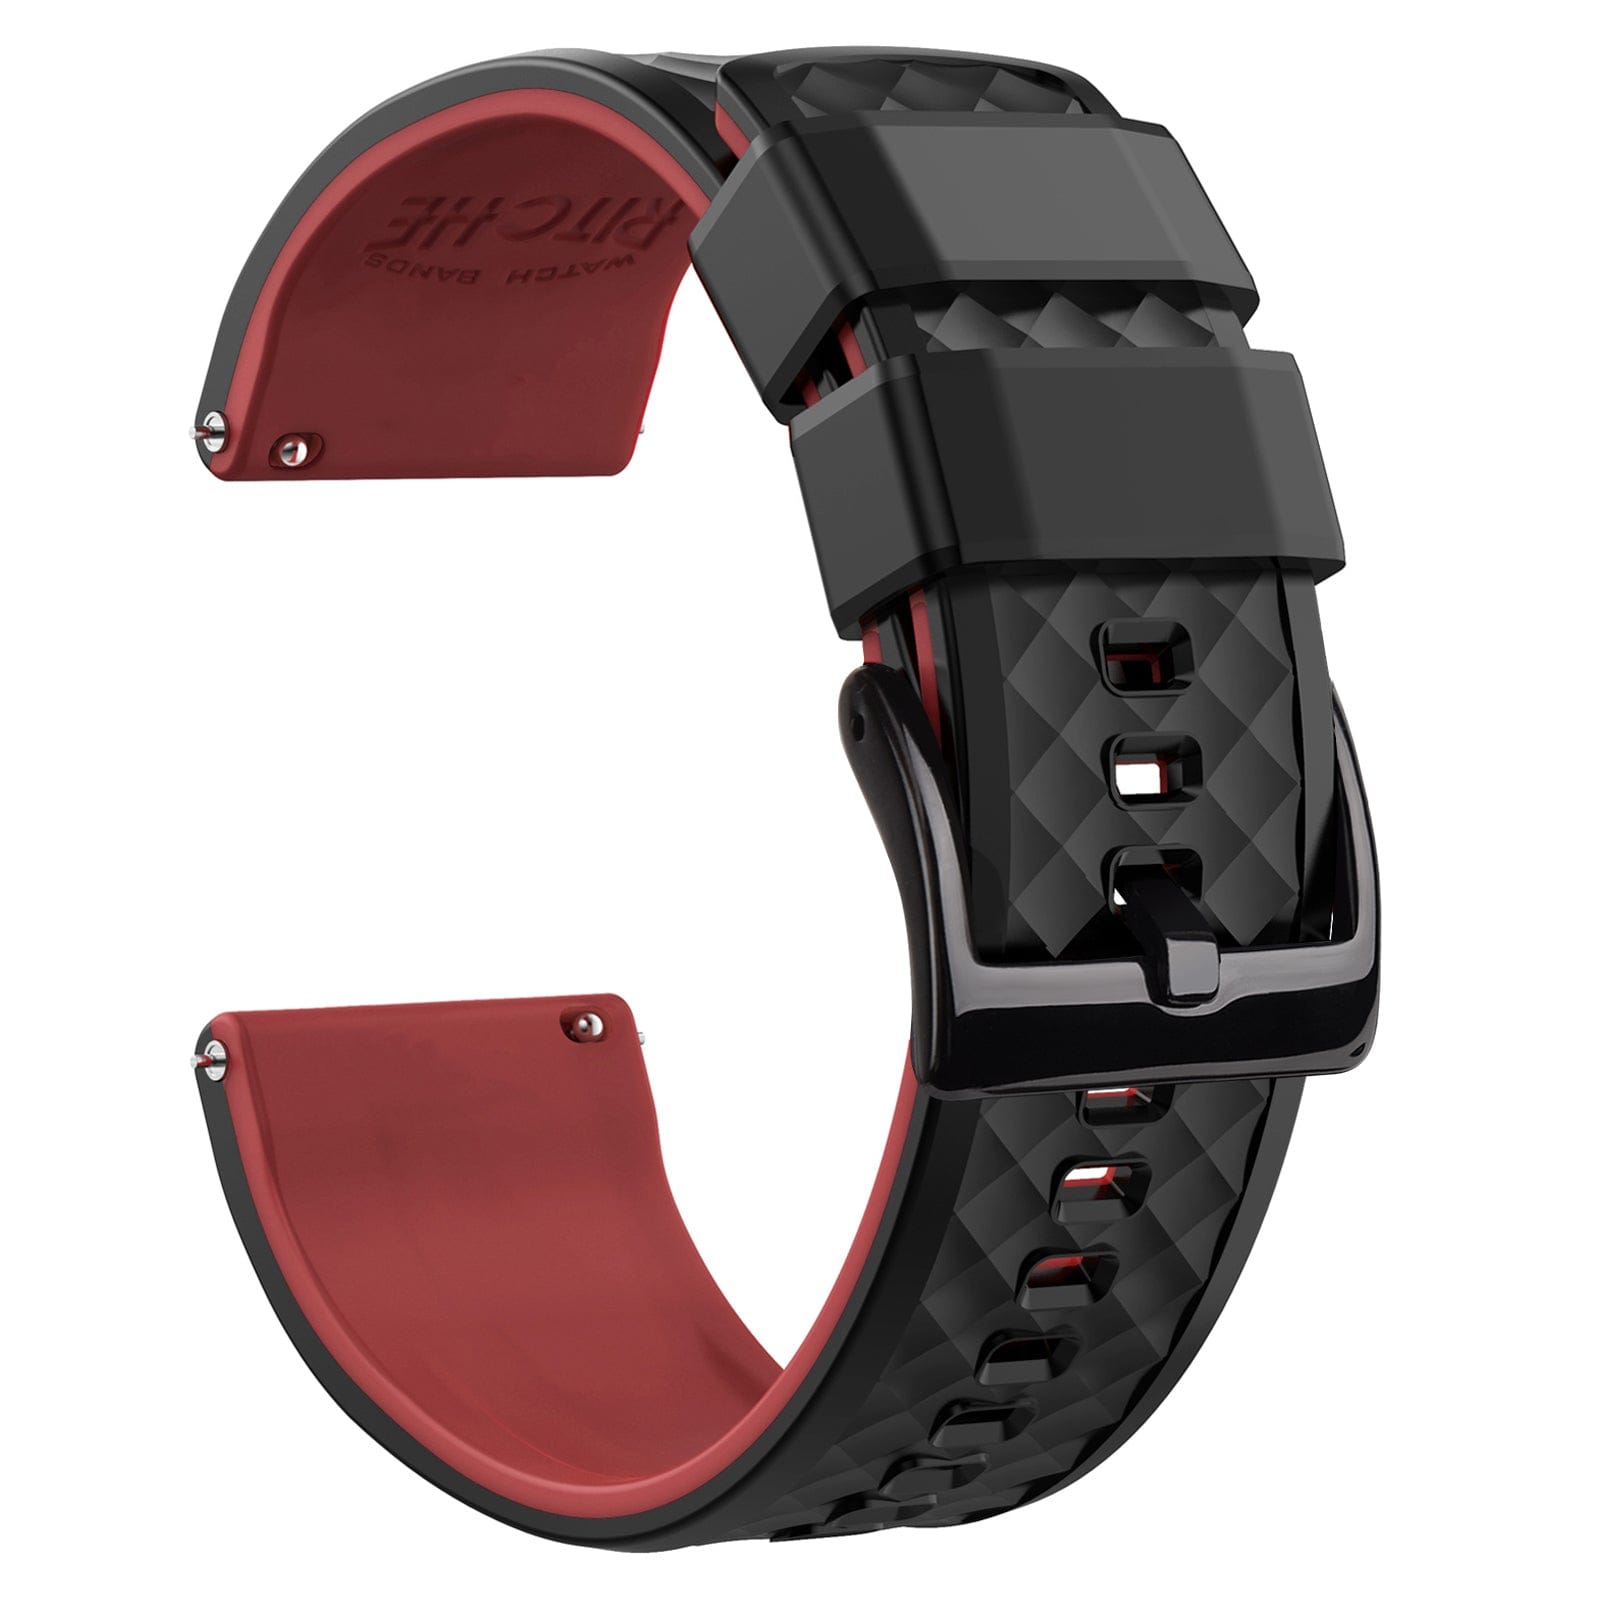 Ritche Watch Bands Watch Bands Black/red / Black Samsung Galaxy Watch Bands 22mm Silicone Straps